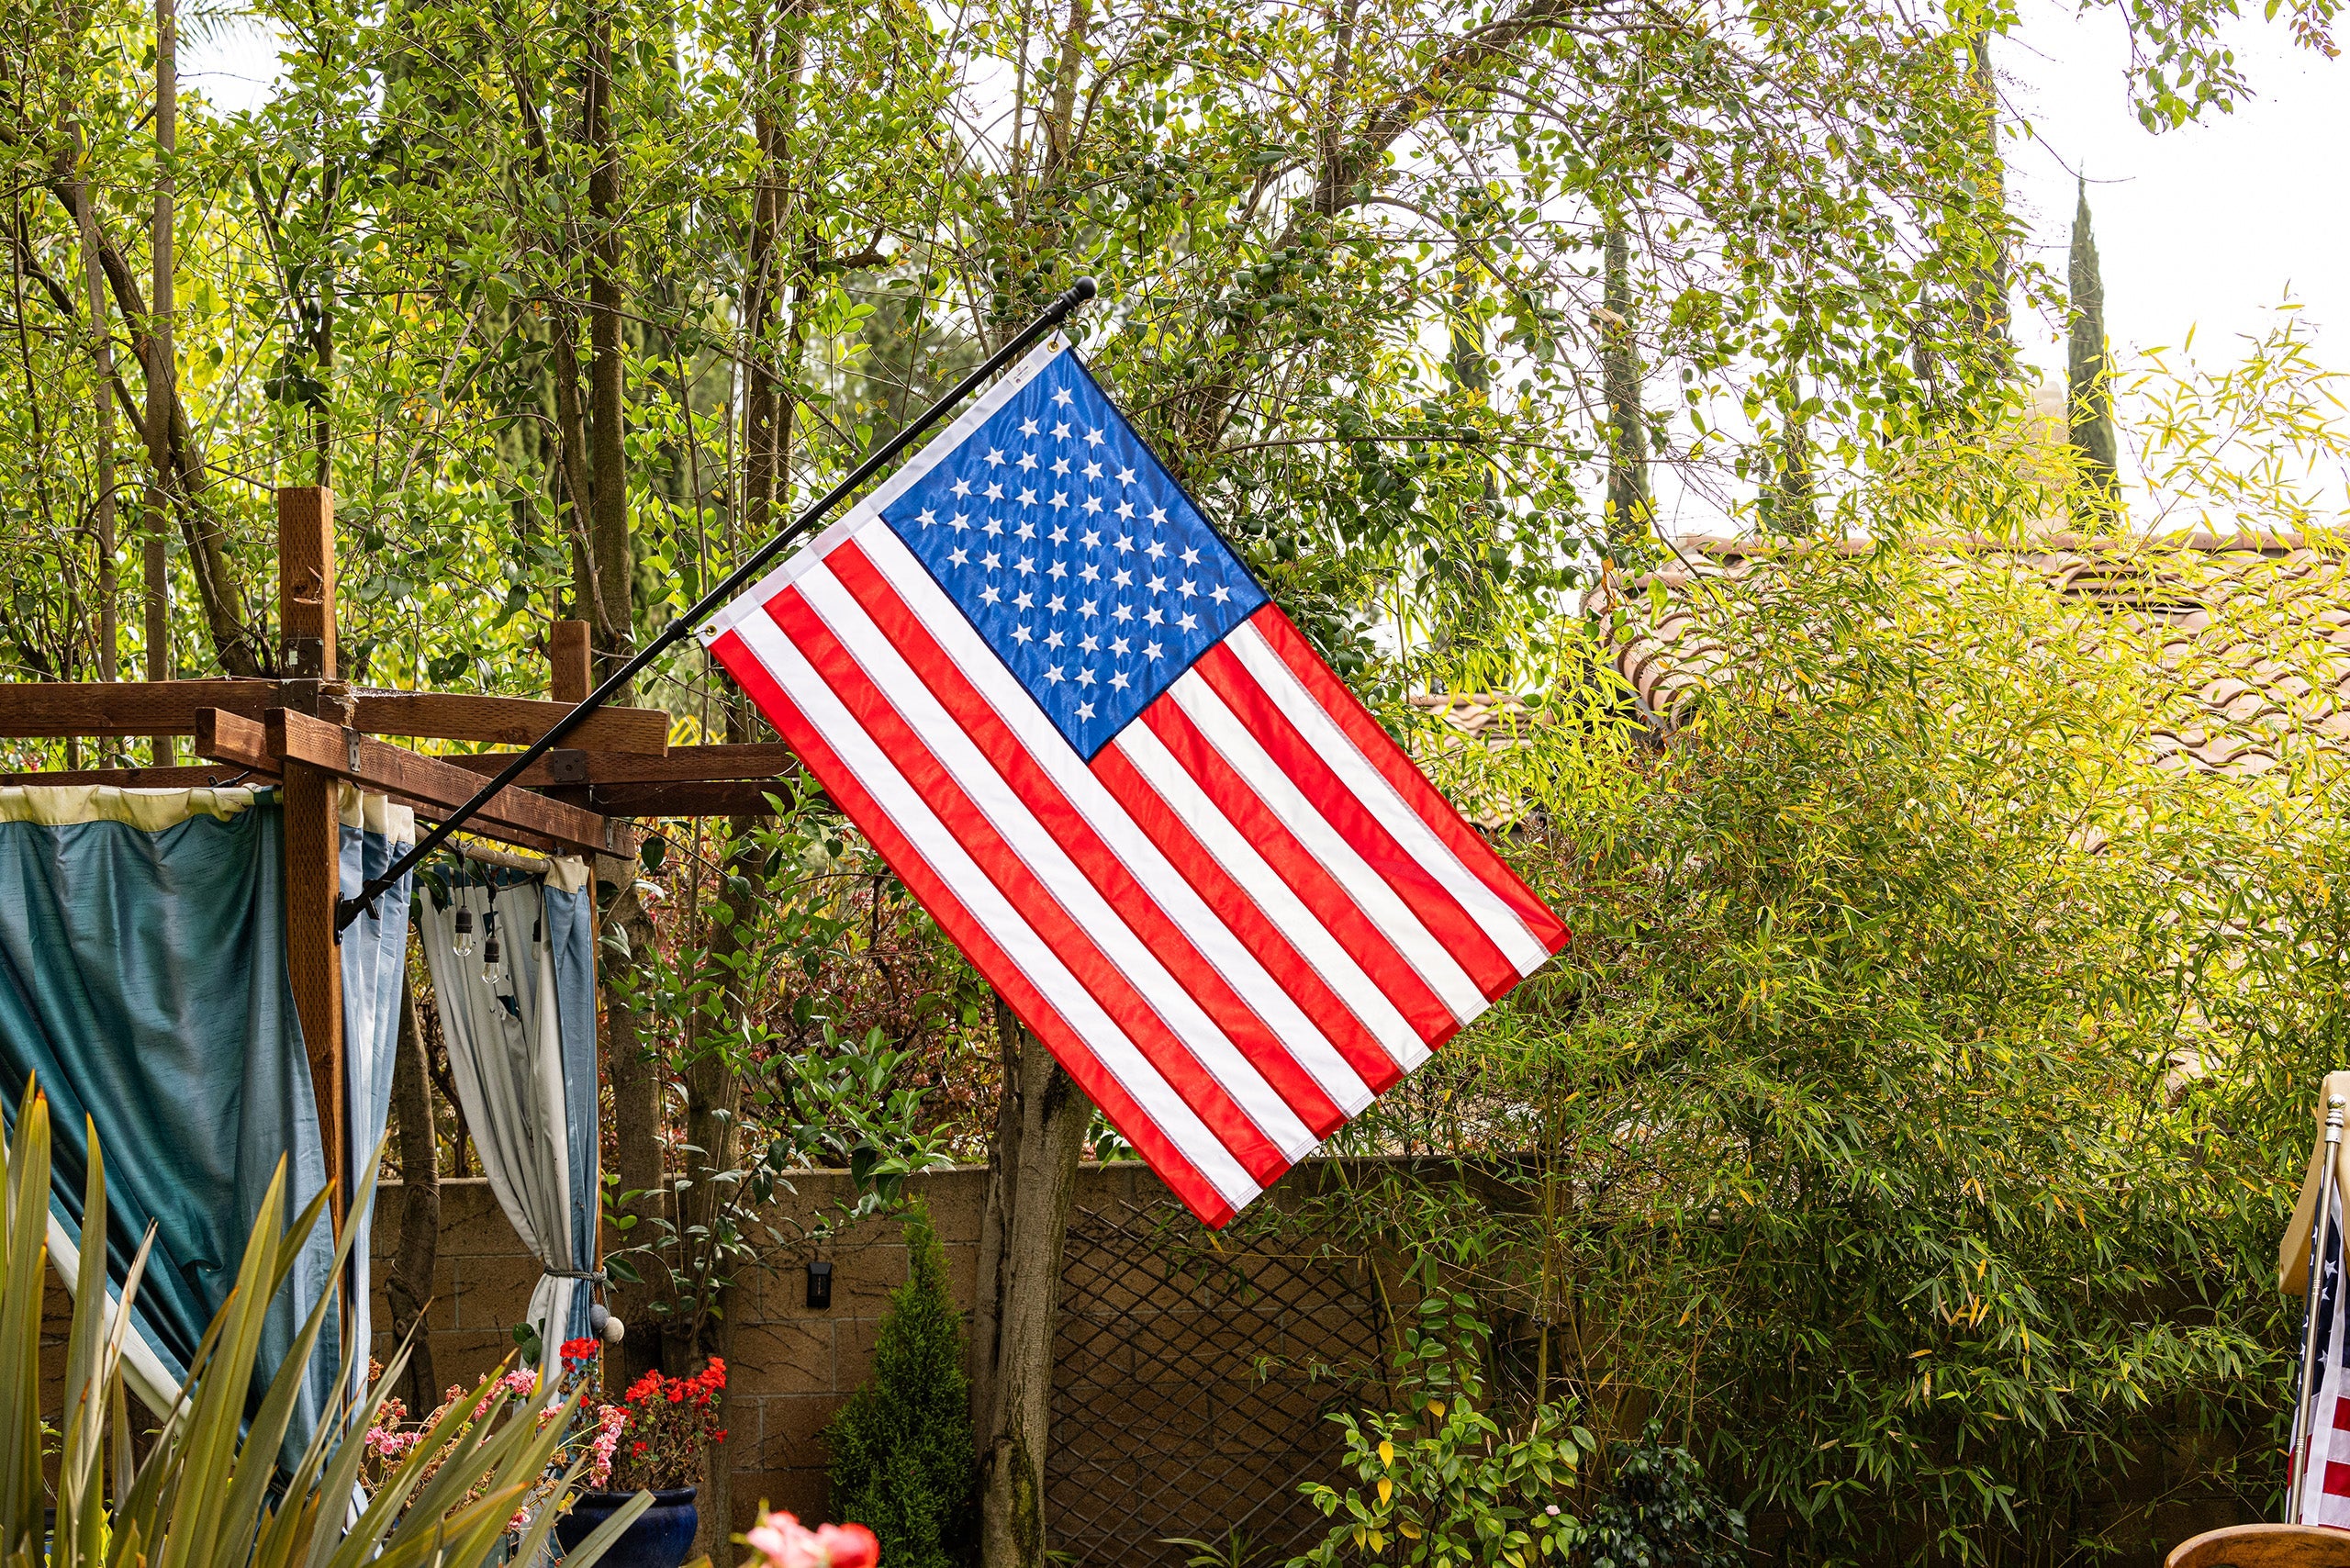 An American flag, made in the USA, is displayed on a pole in a lush, green backyard with trees and plants surrounding it.